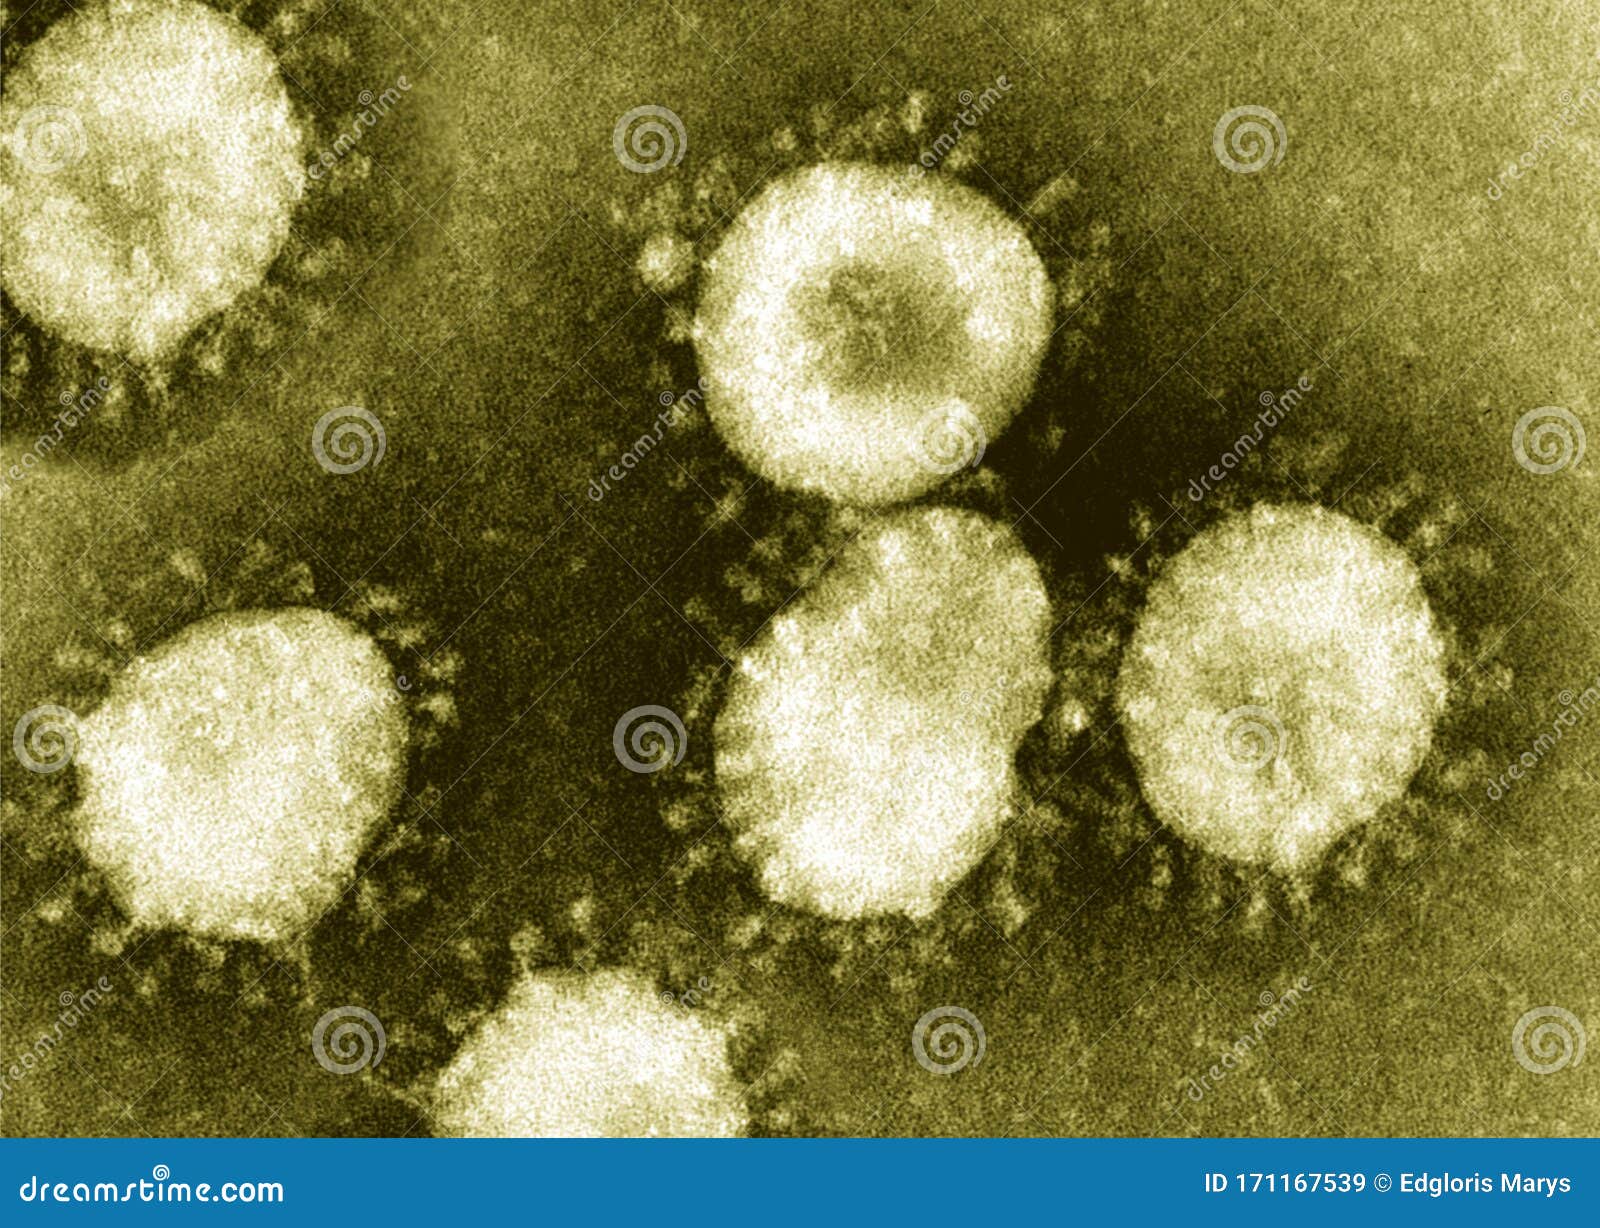 detail of ultraestructure of deadly coronavirus particles under transmission electron microscopy tem